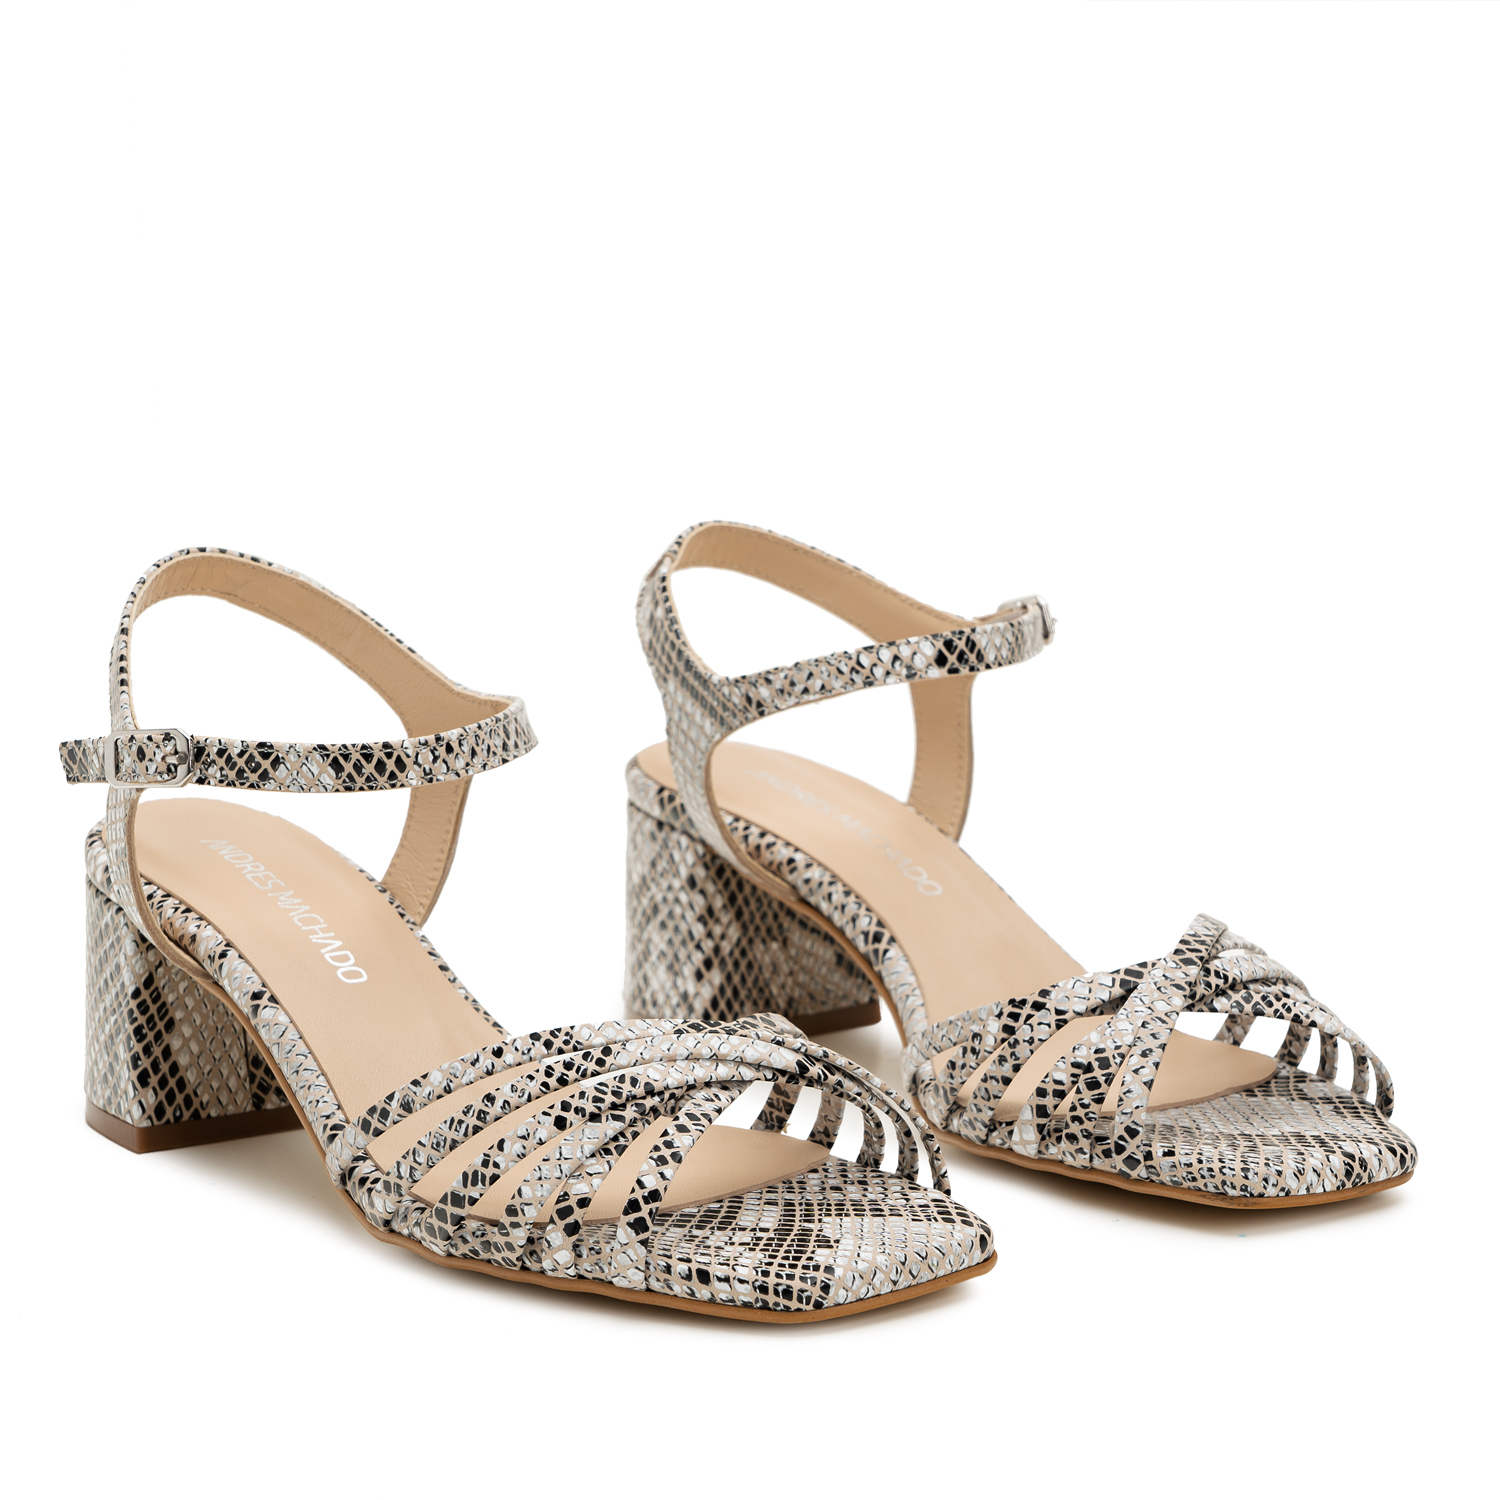 Strapped Sandals in Brown Snake Print Leather 